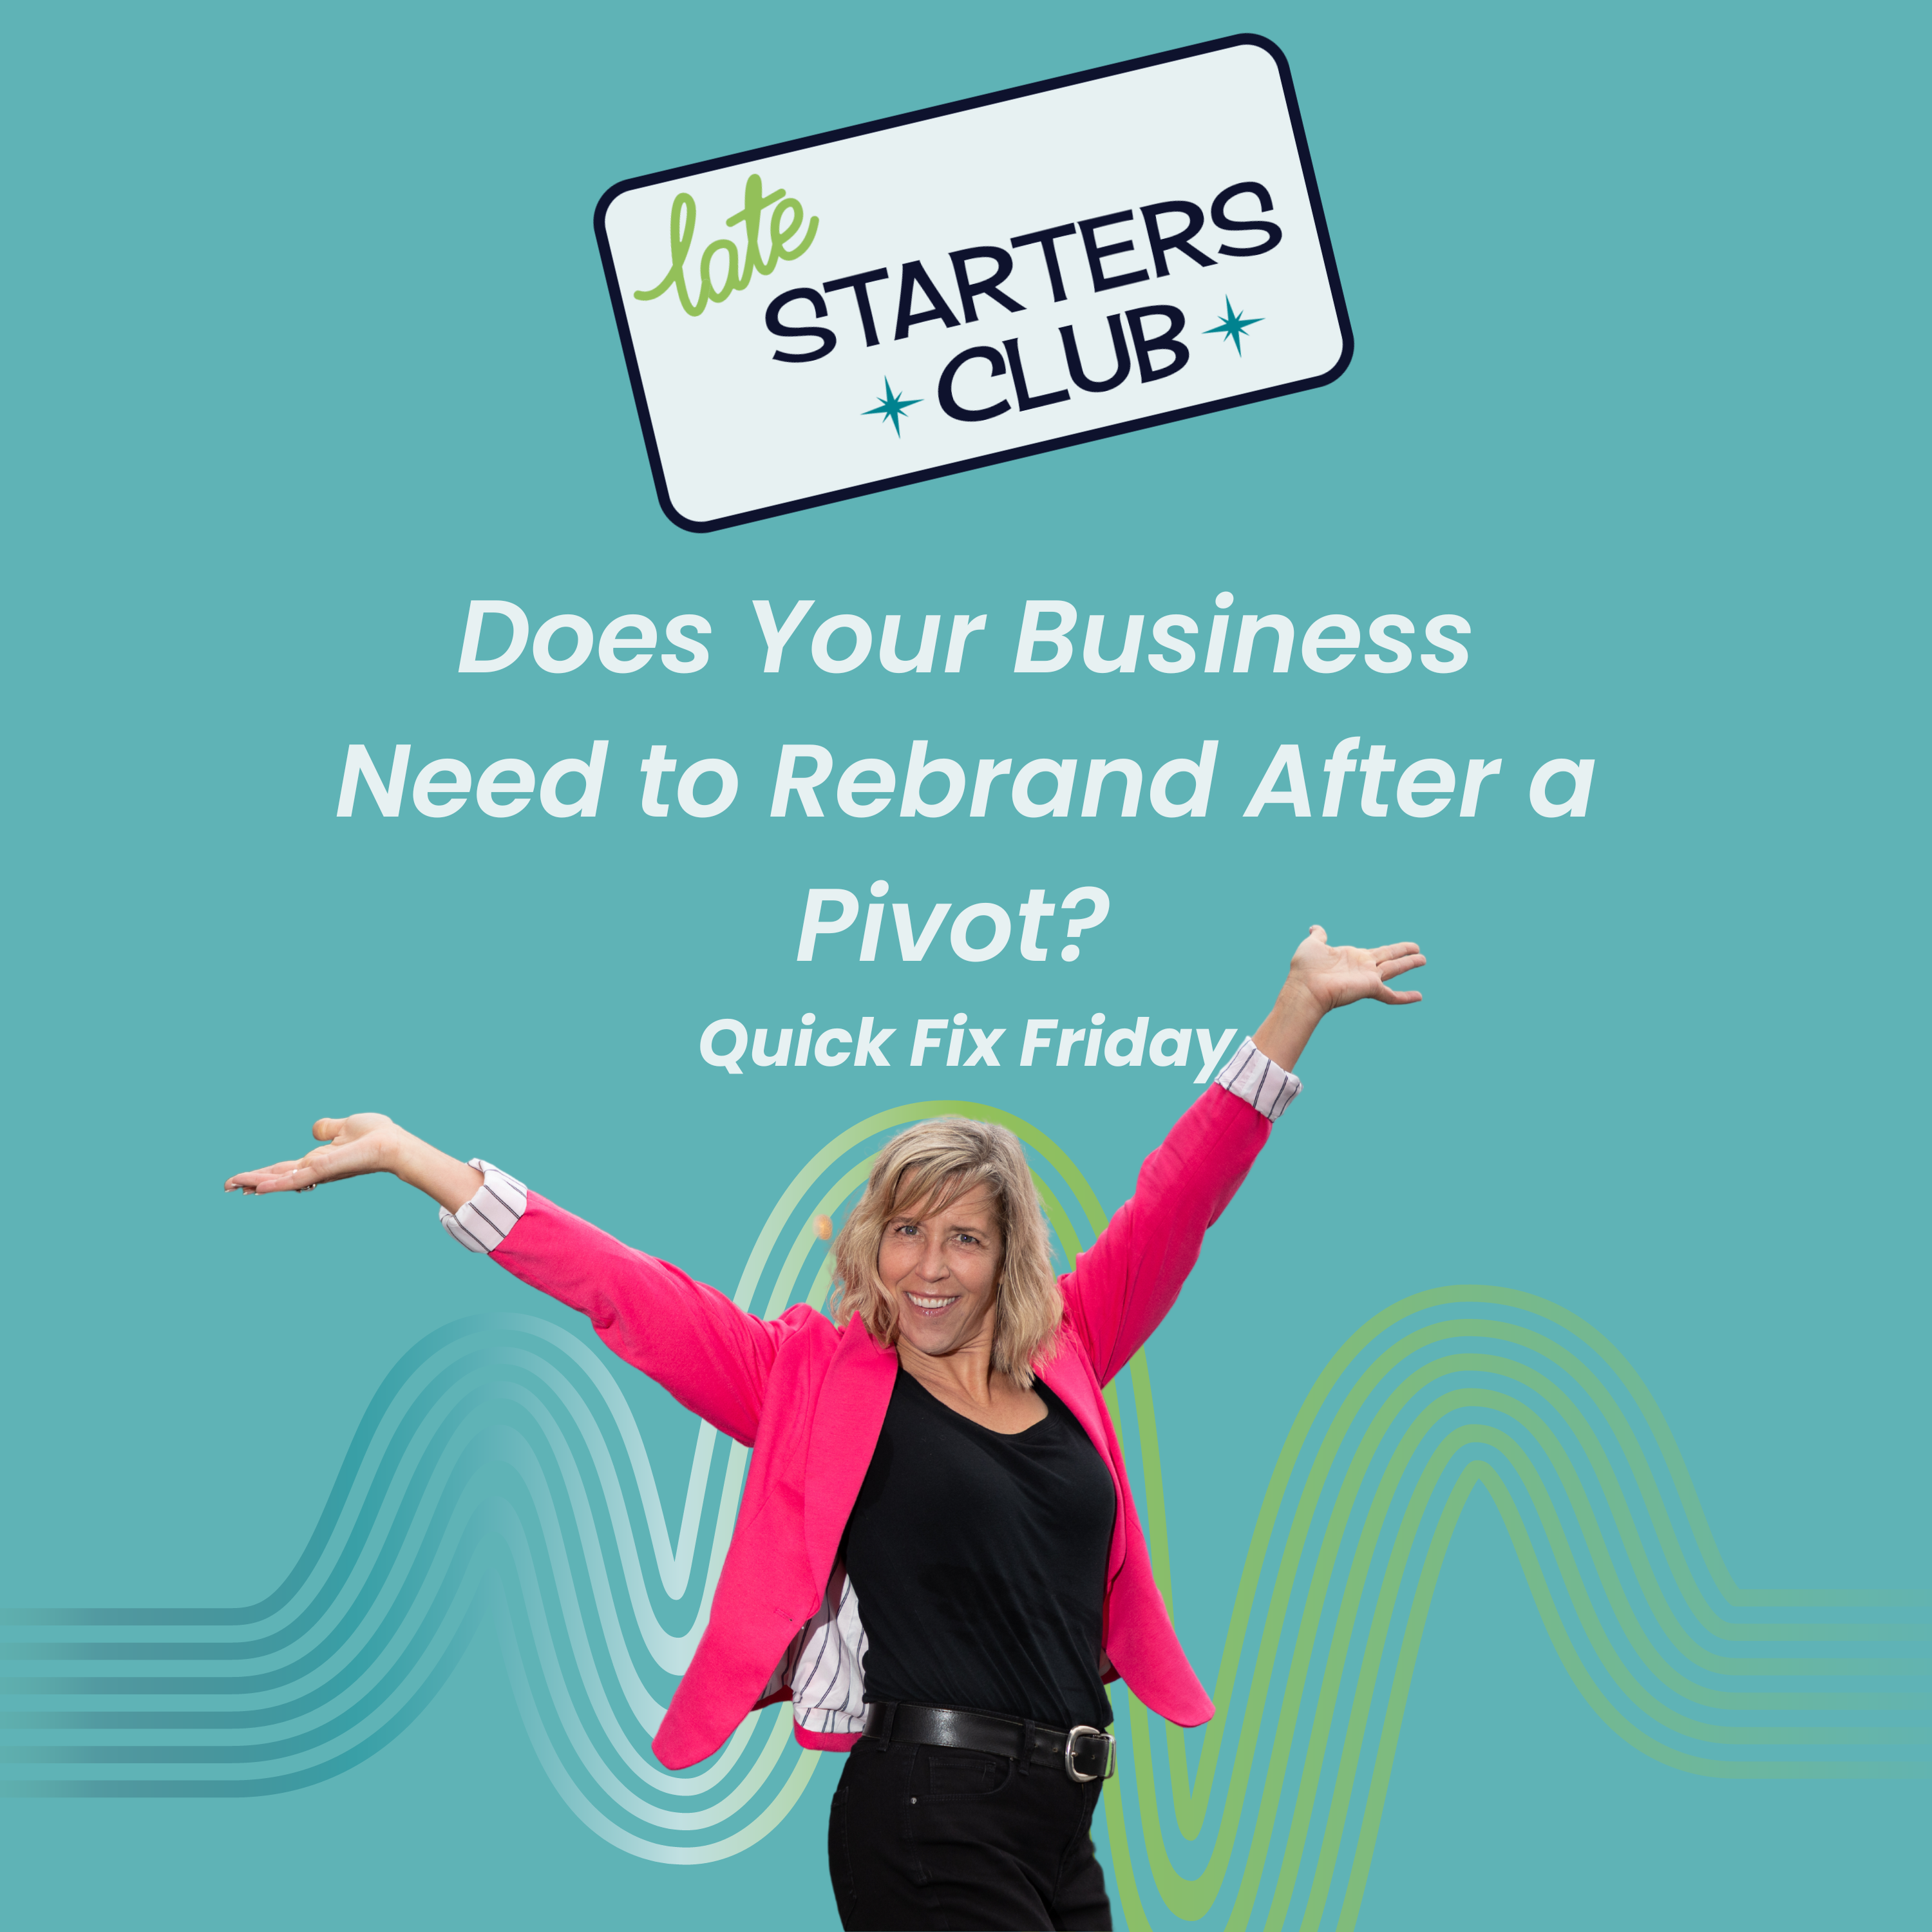 148: Does Your Business Need to Rebrand After a Pivot – Quick Fix Friday